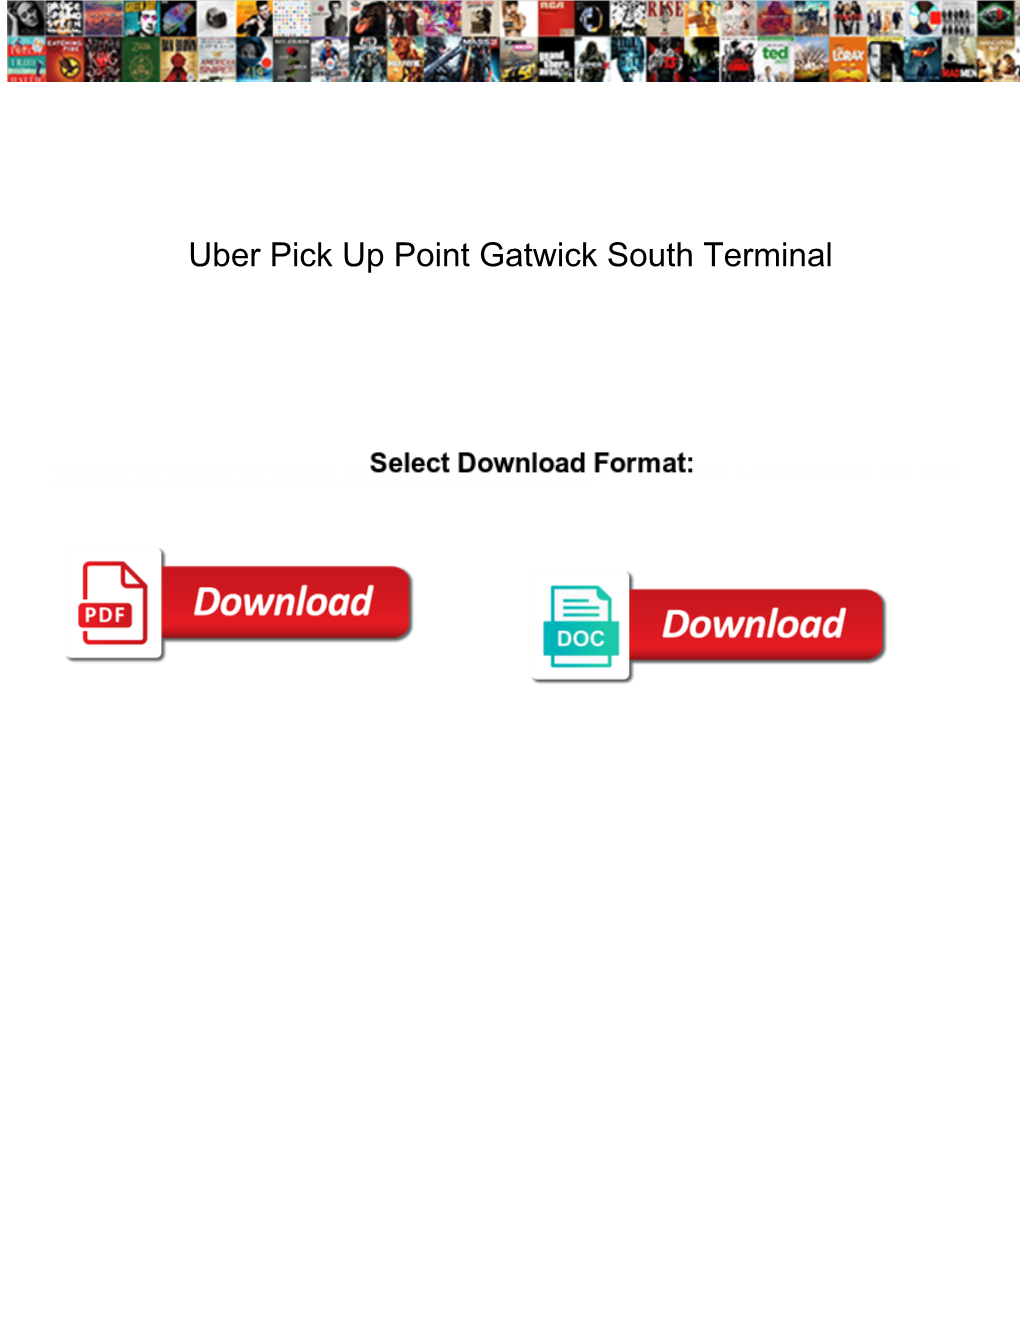 Uber Pick up Point Gatwick South Terminal